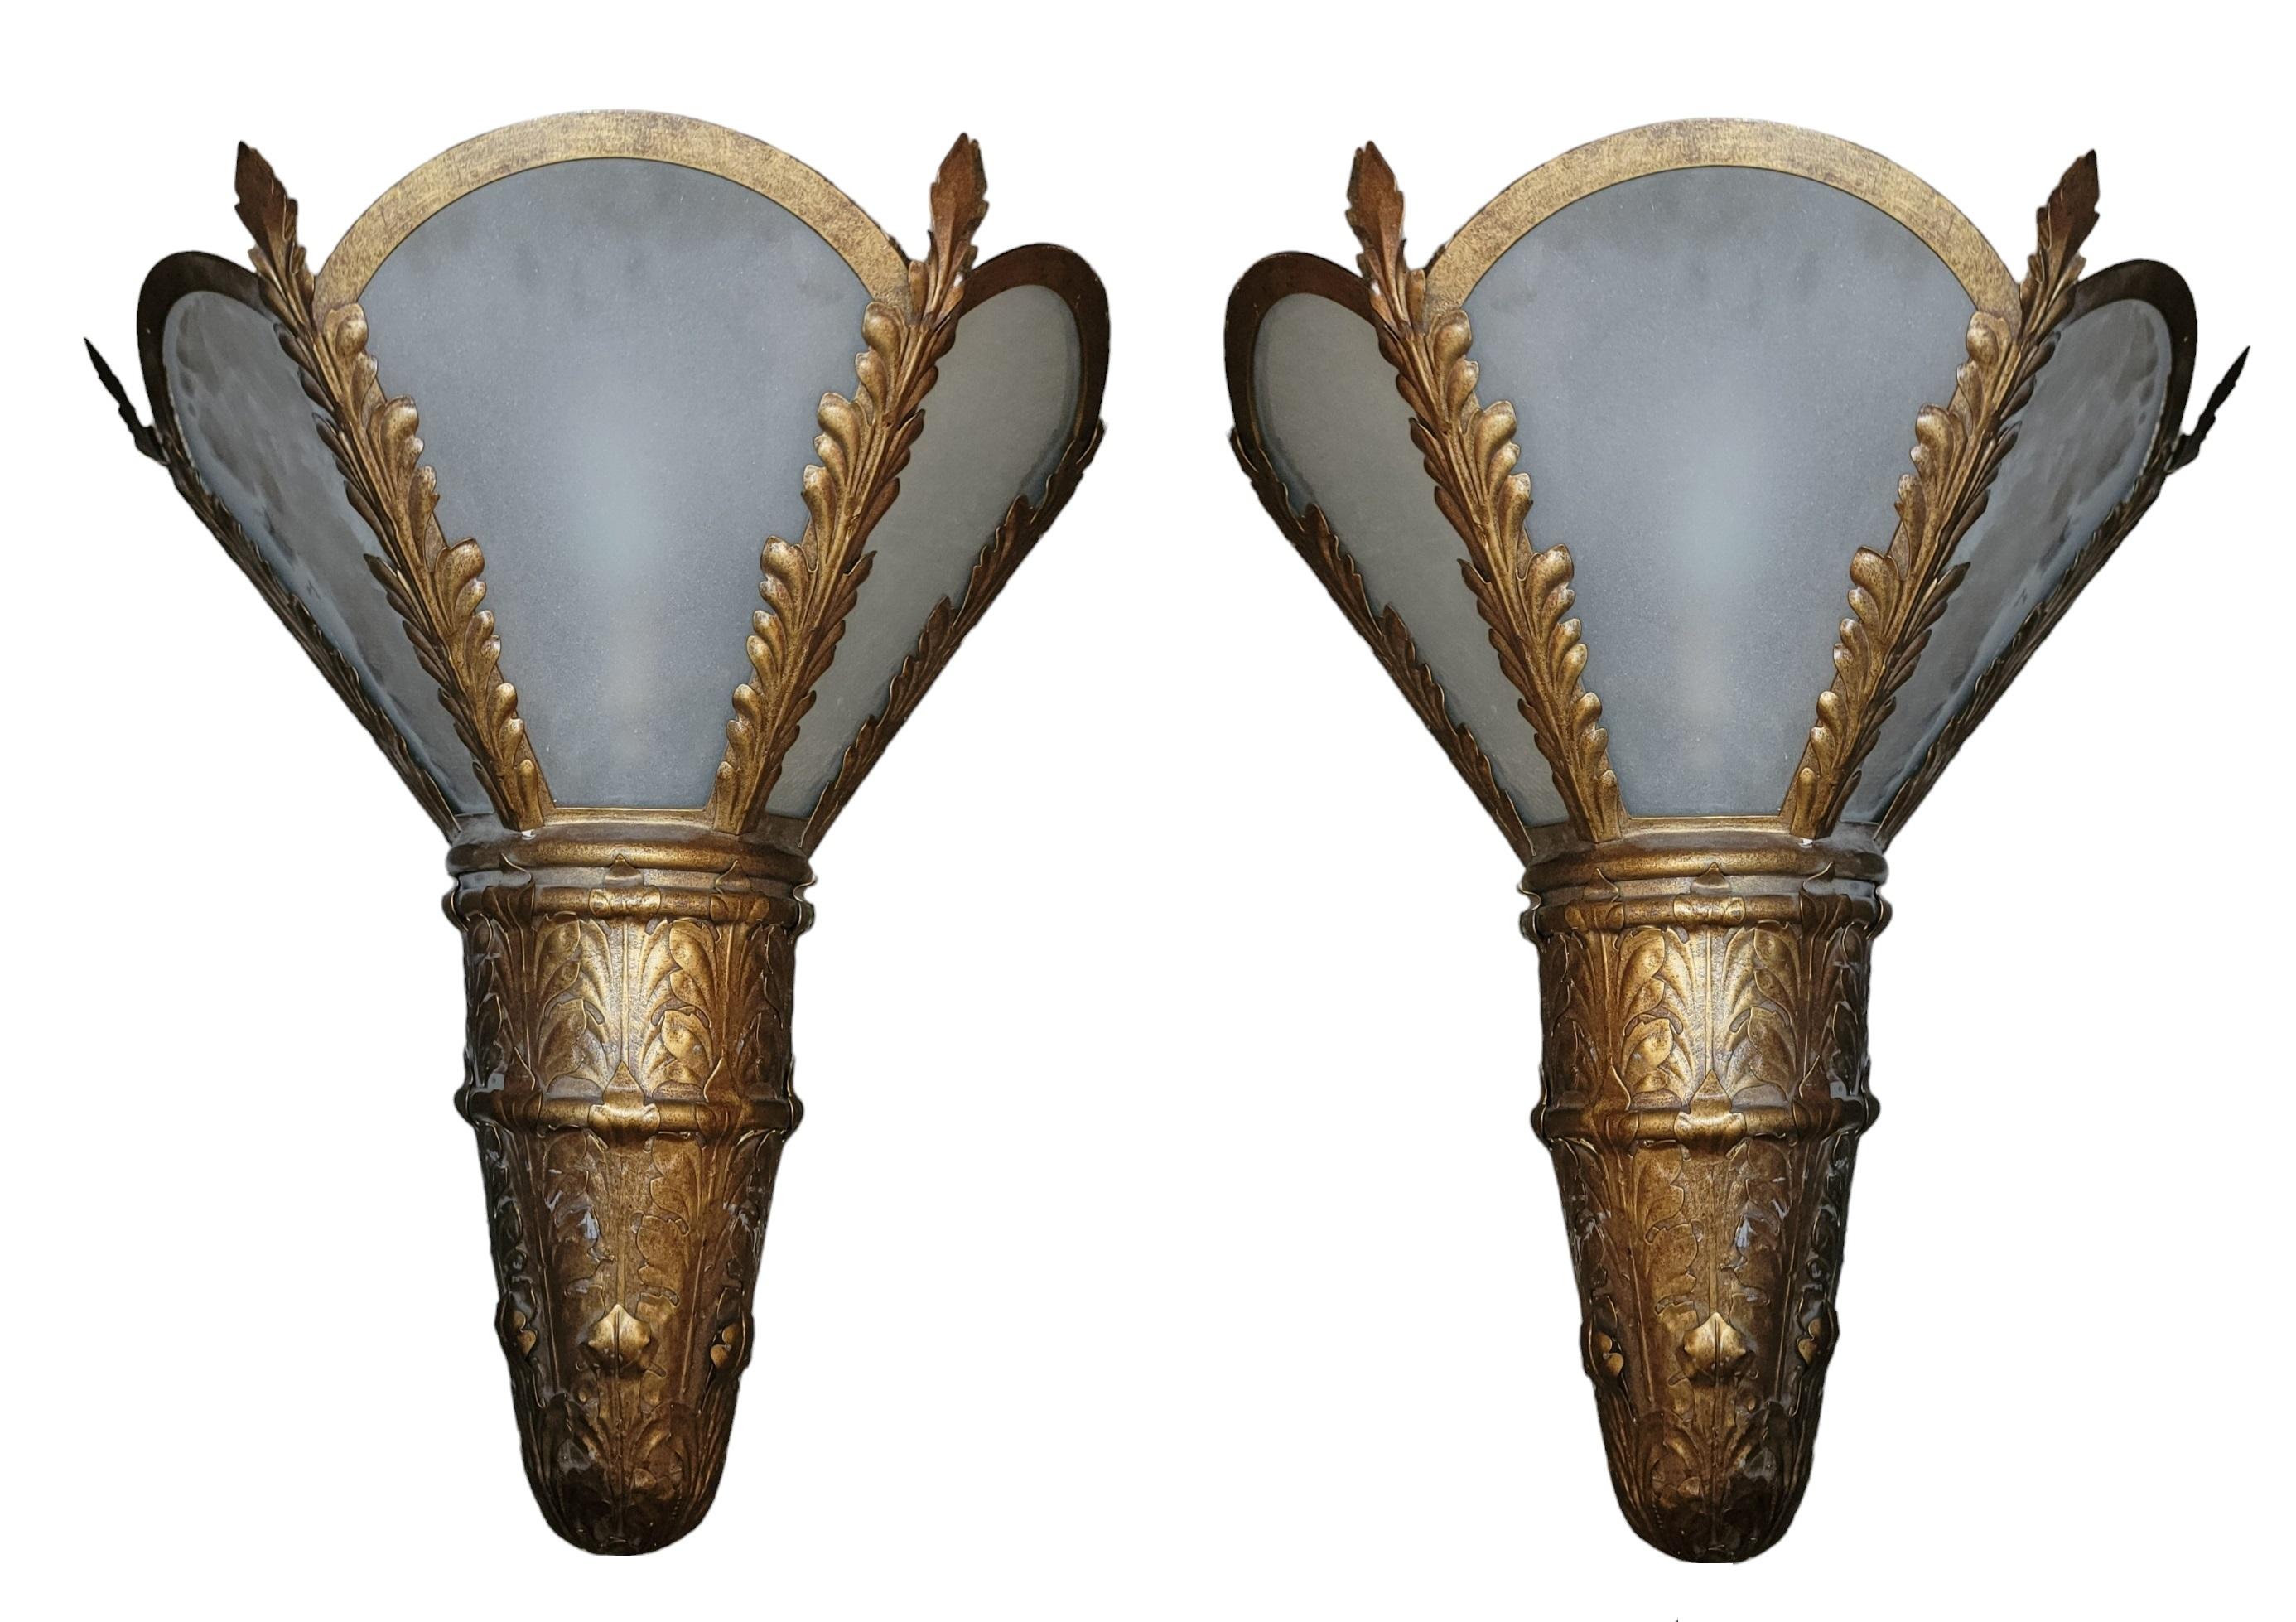 Pair of Metal Sconces From The Century Plaza Hotel. Measures approx 22h x 18w x 10d
